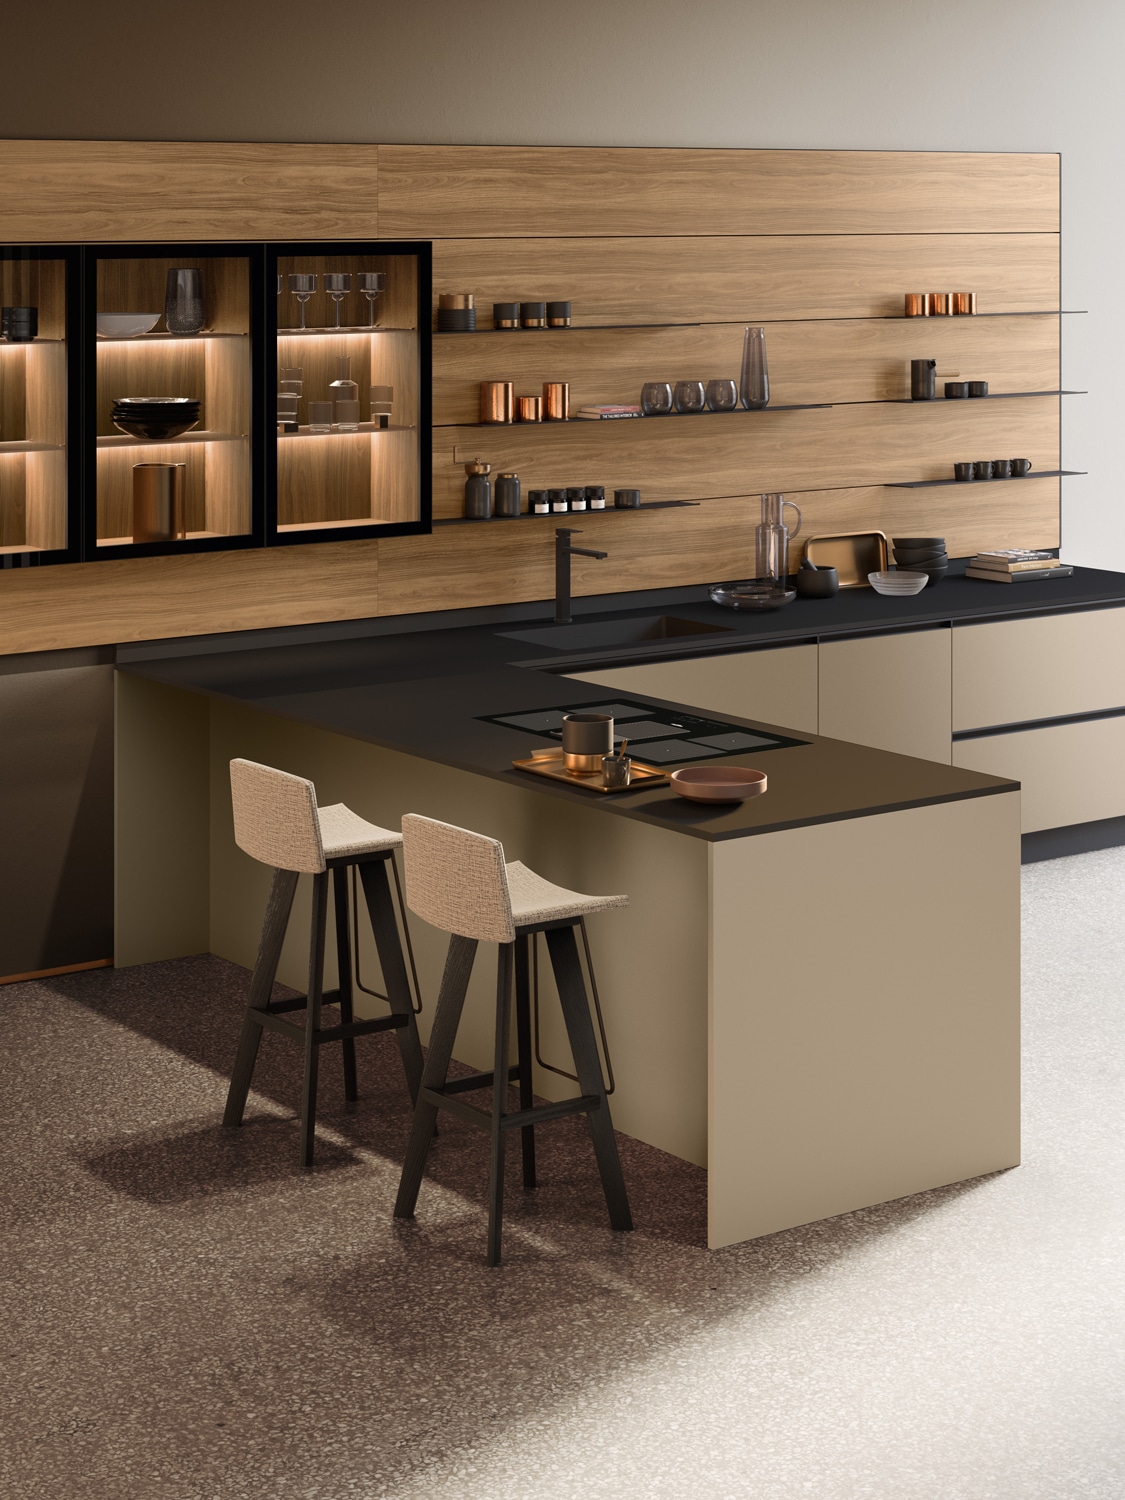 The Infinity boiserie in Noce (Walnut) Caramel melamine features minimalist open shelves in Black anodized aluminum. The same finishes are used on the glass cabinets, creating an elegant display area on the wall that harmonizes the kitchen with the living room. 